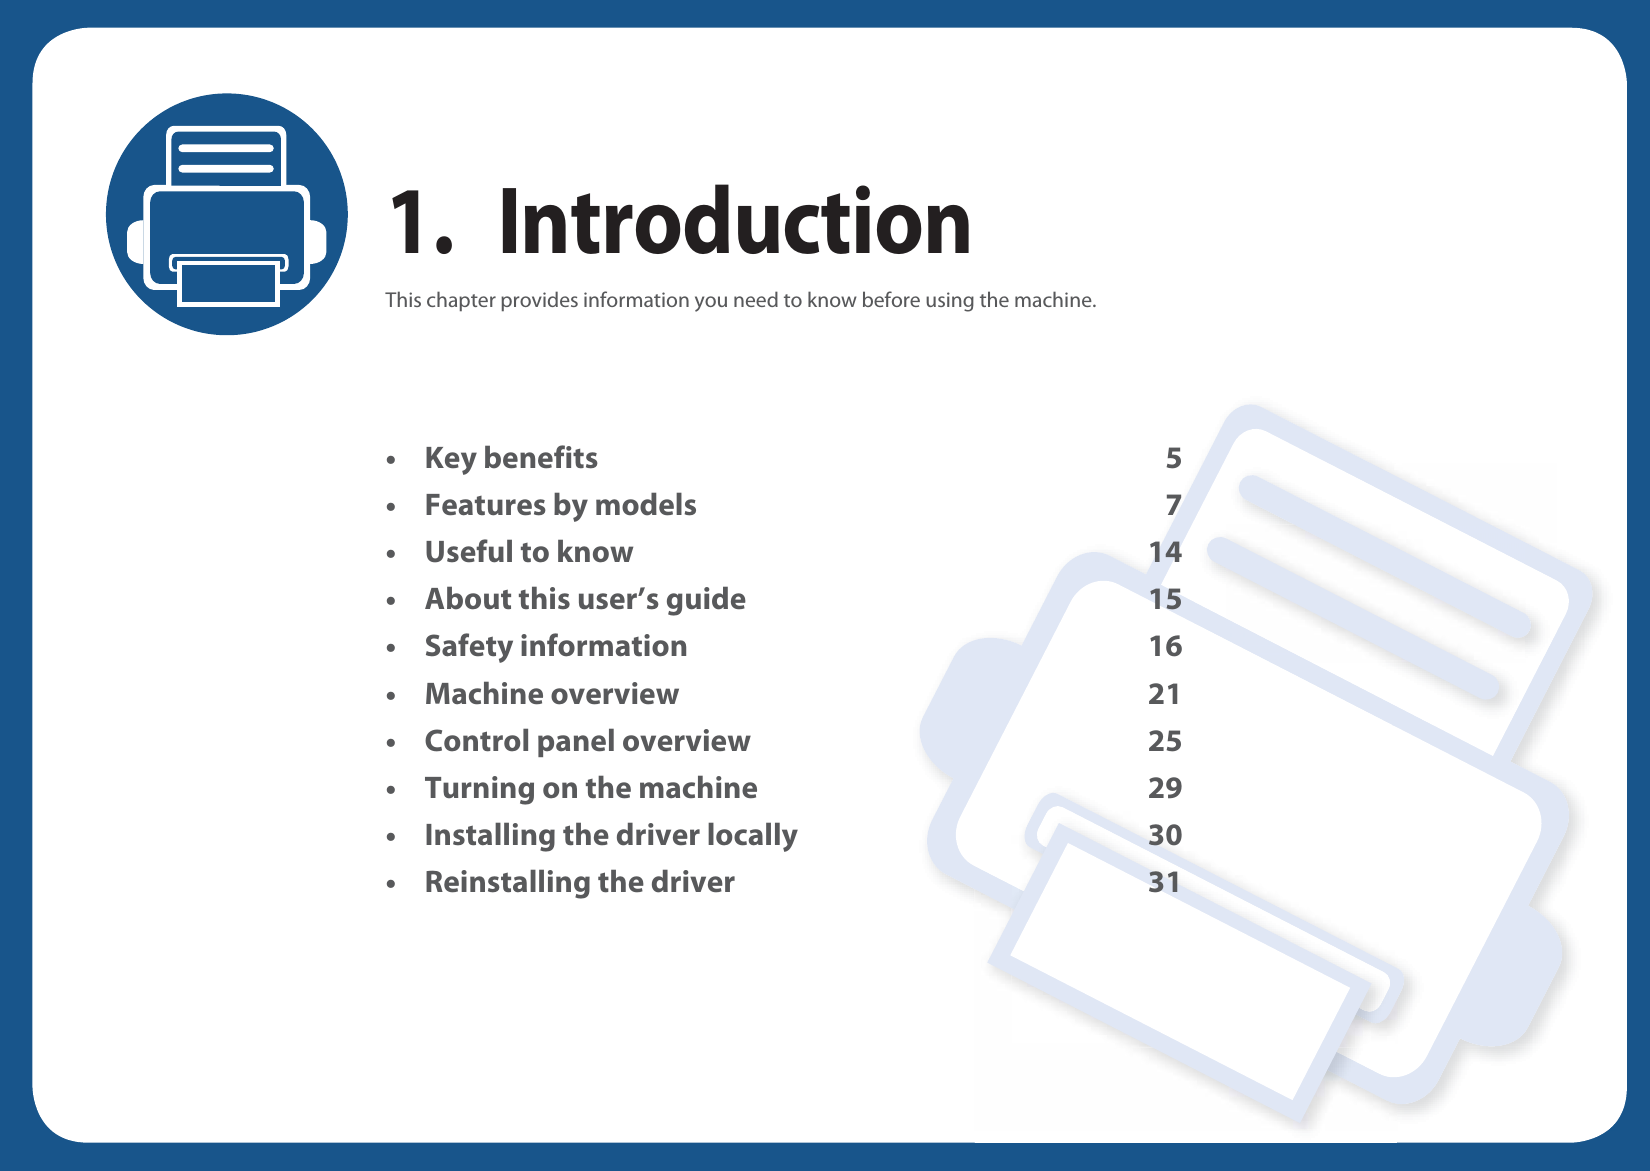 1. IntroductionThis chapter provides information you need to know before using the machine.• Key benefits 5• Features by models 7• Useful to know 14• About this user’s guide 15• Safety information 16• Machine overview 21• Control panel overview 25• Turning on the machine 29• Installing the driver locally 30• Reinstalling the driver 31